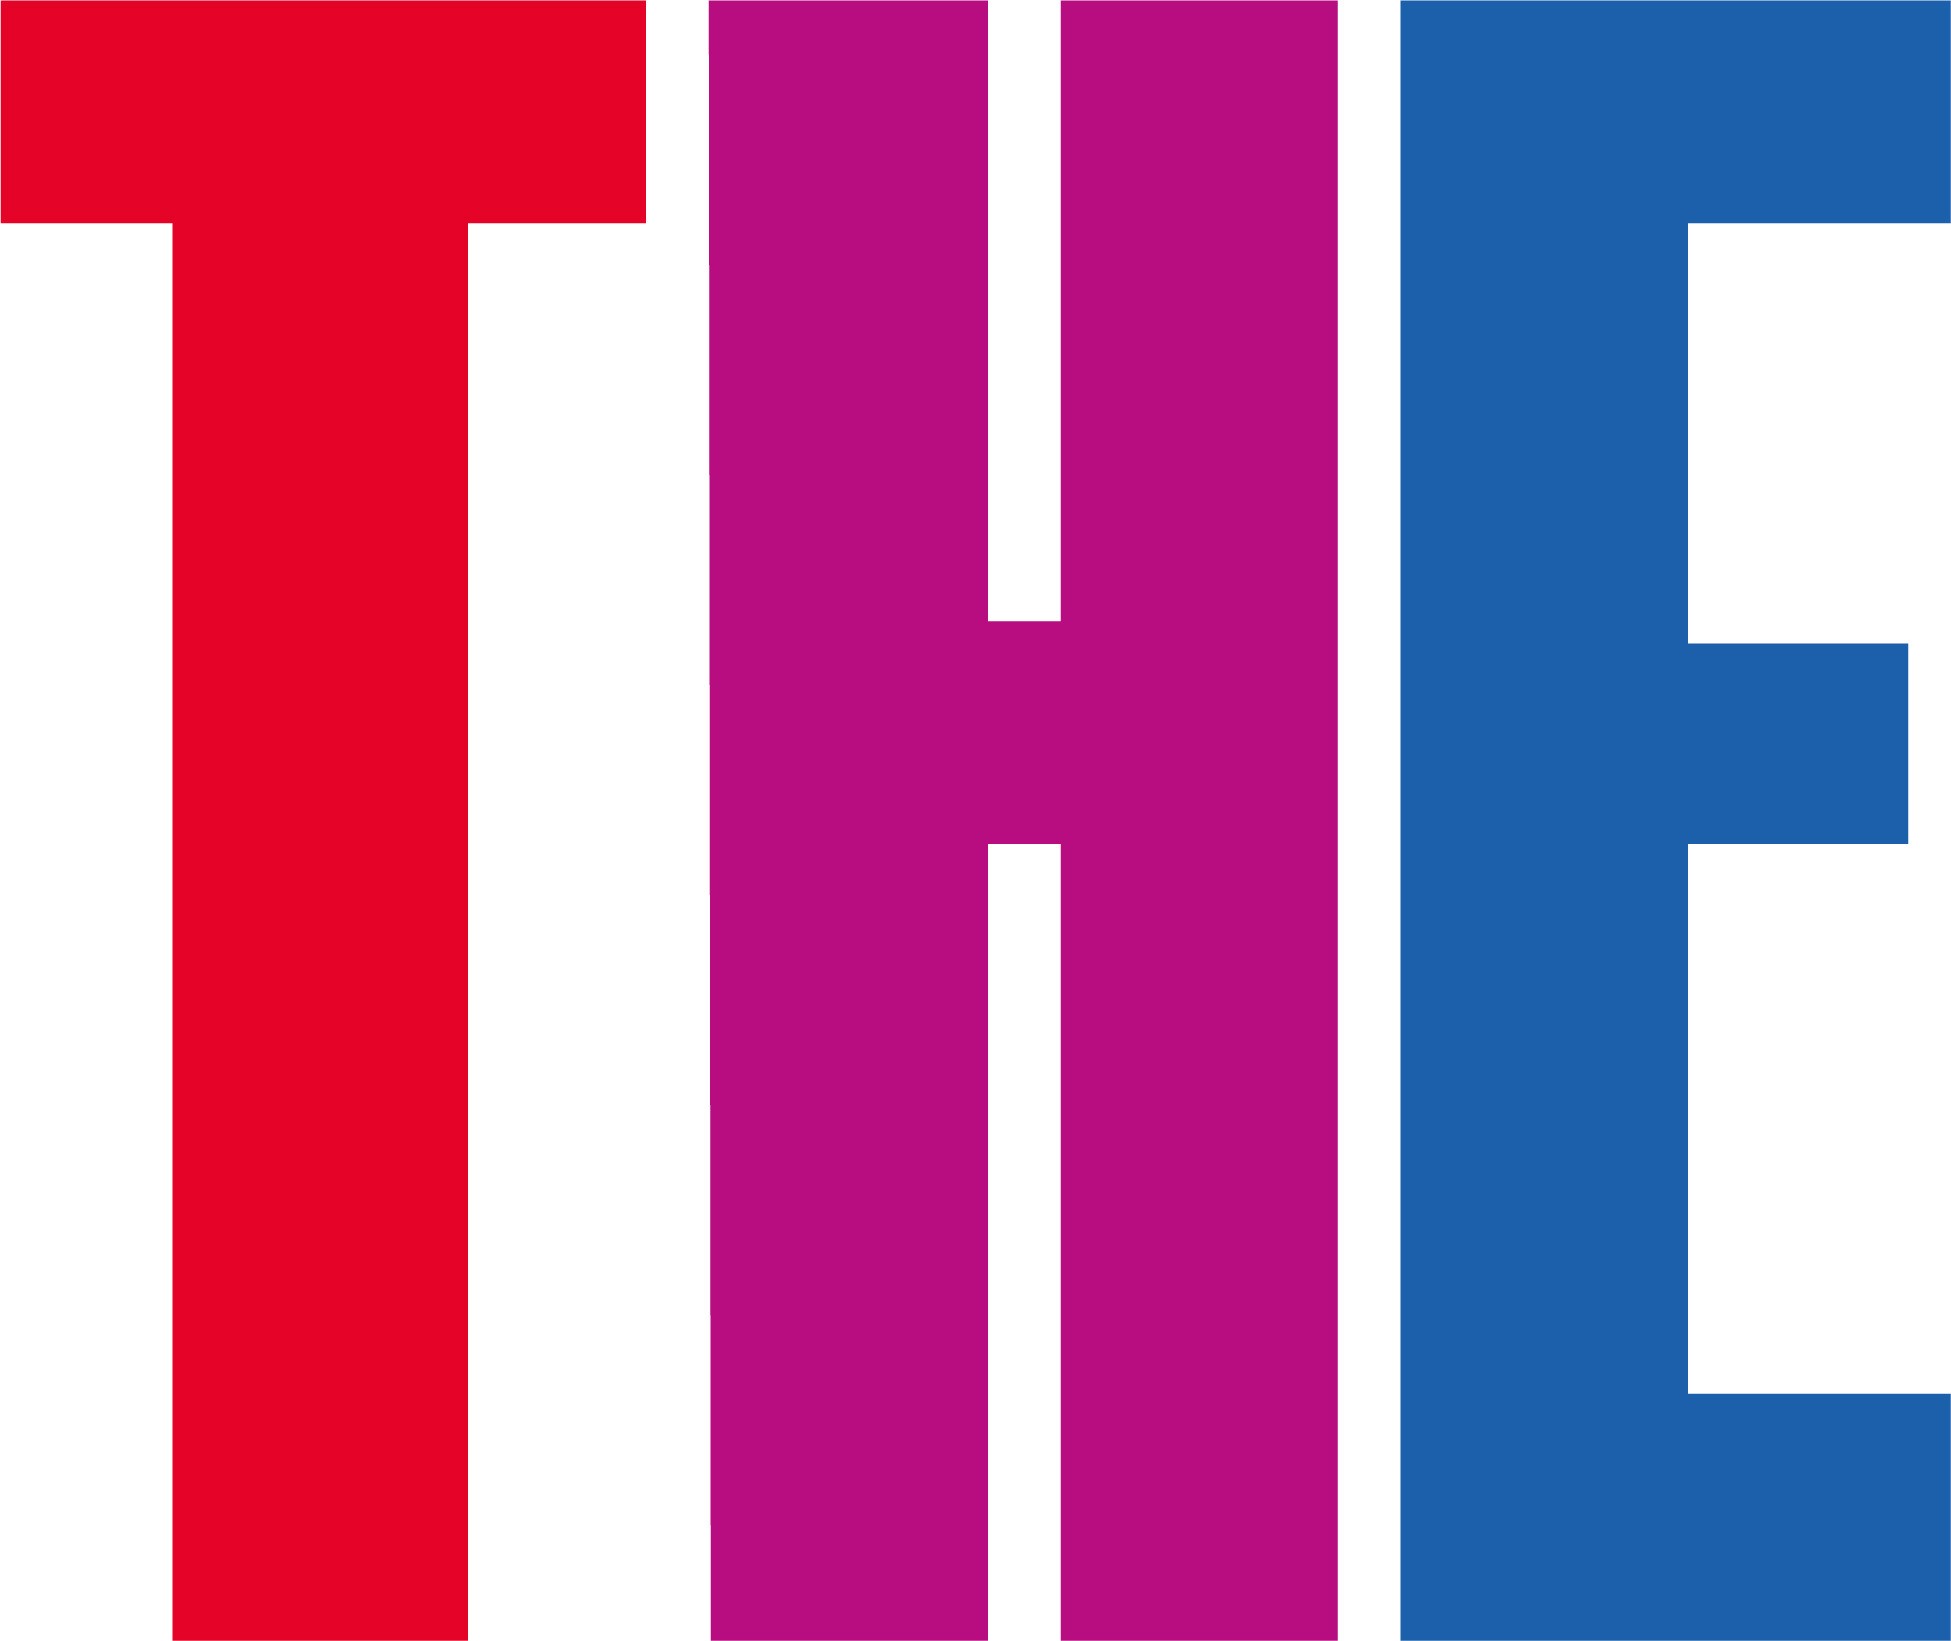 With the Times Higher Education logo, a red T, purple H and blue E.